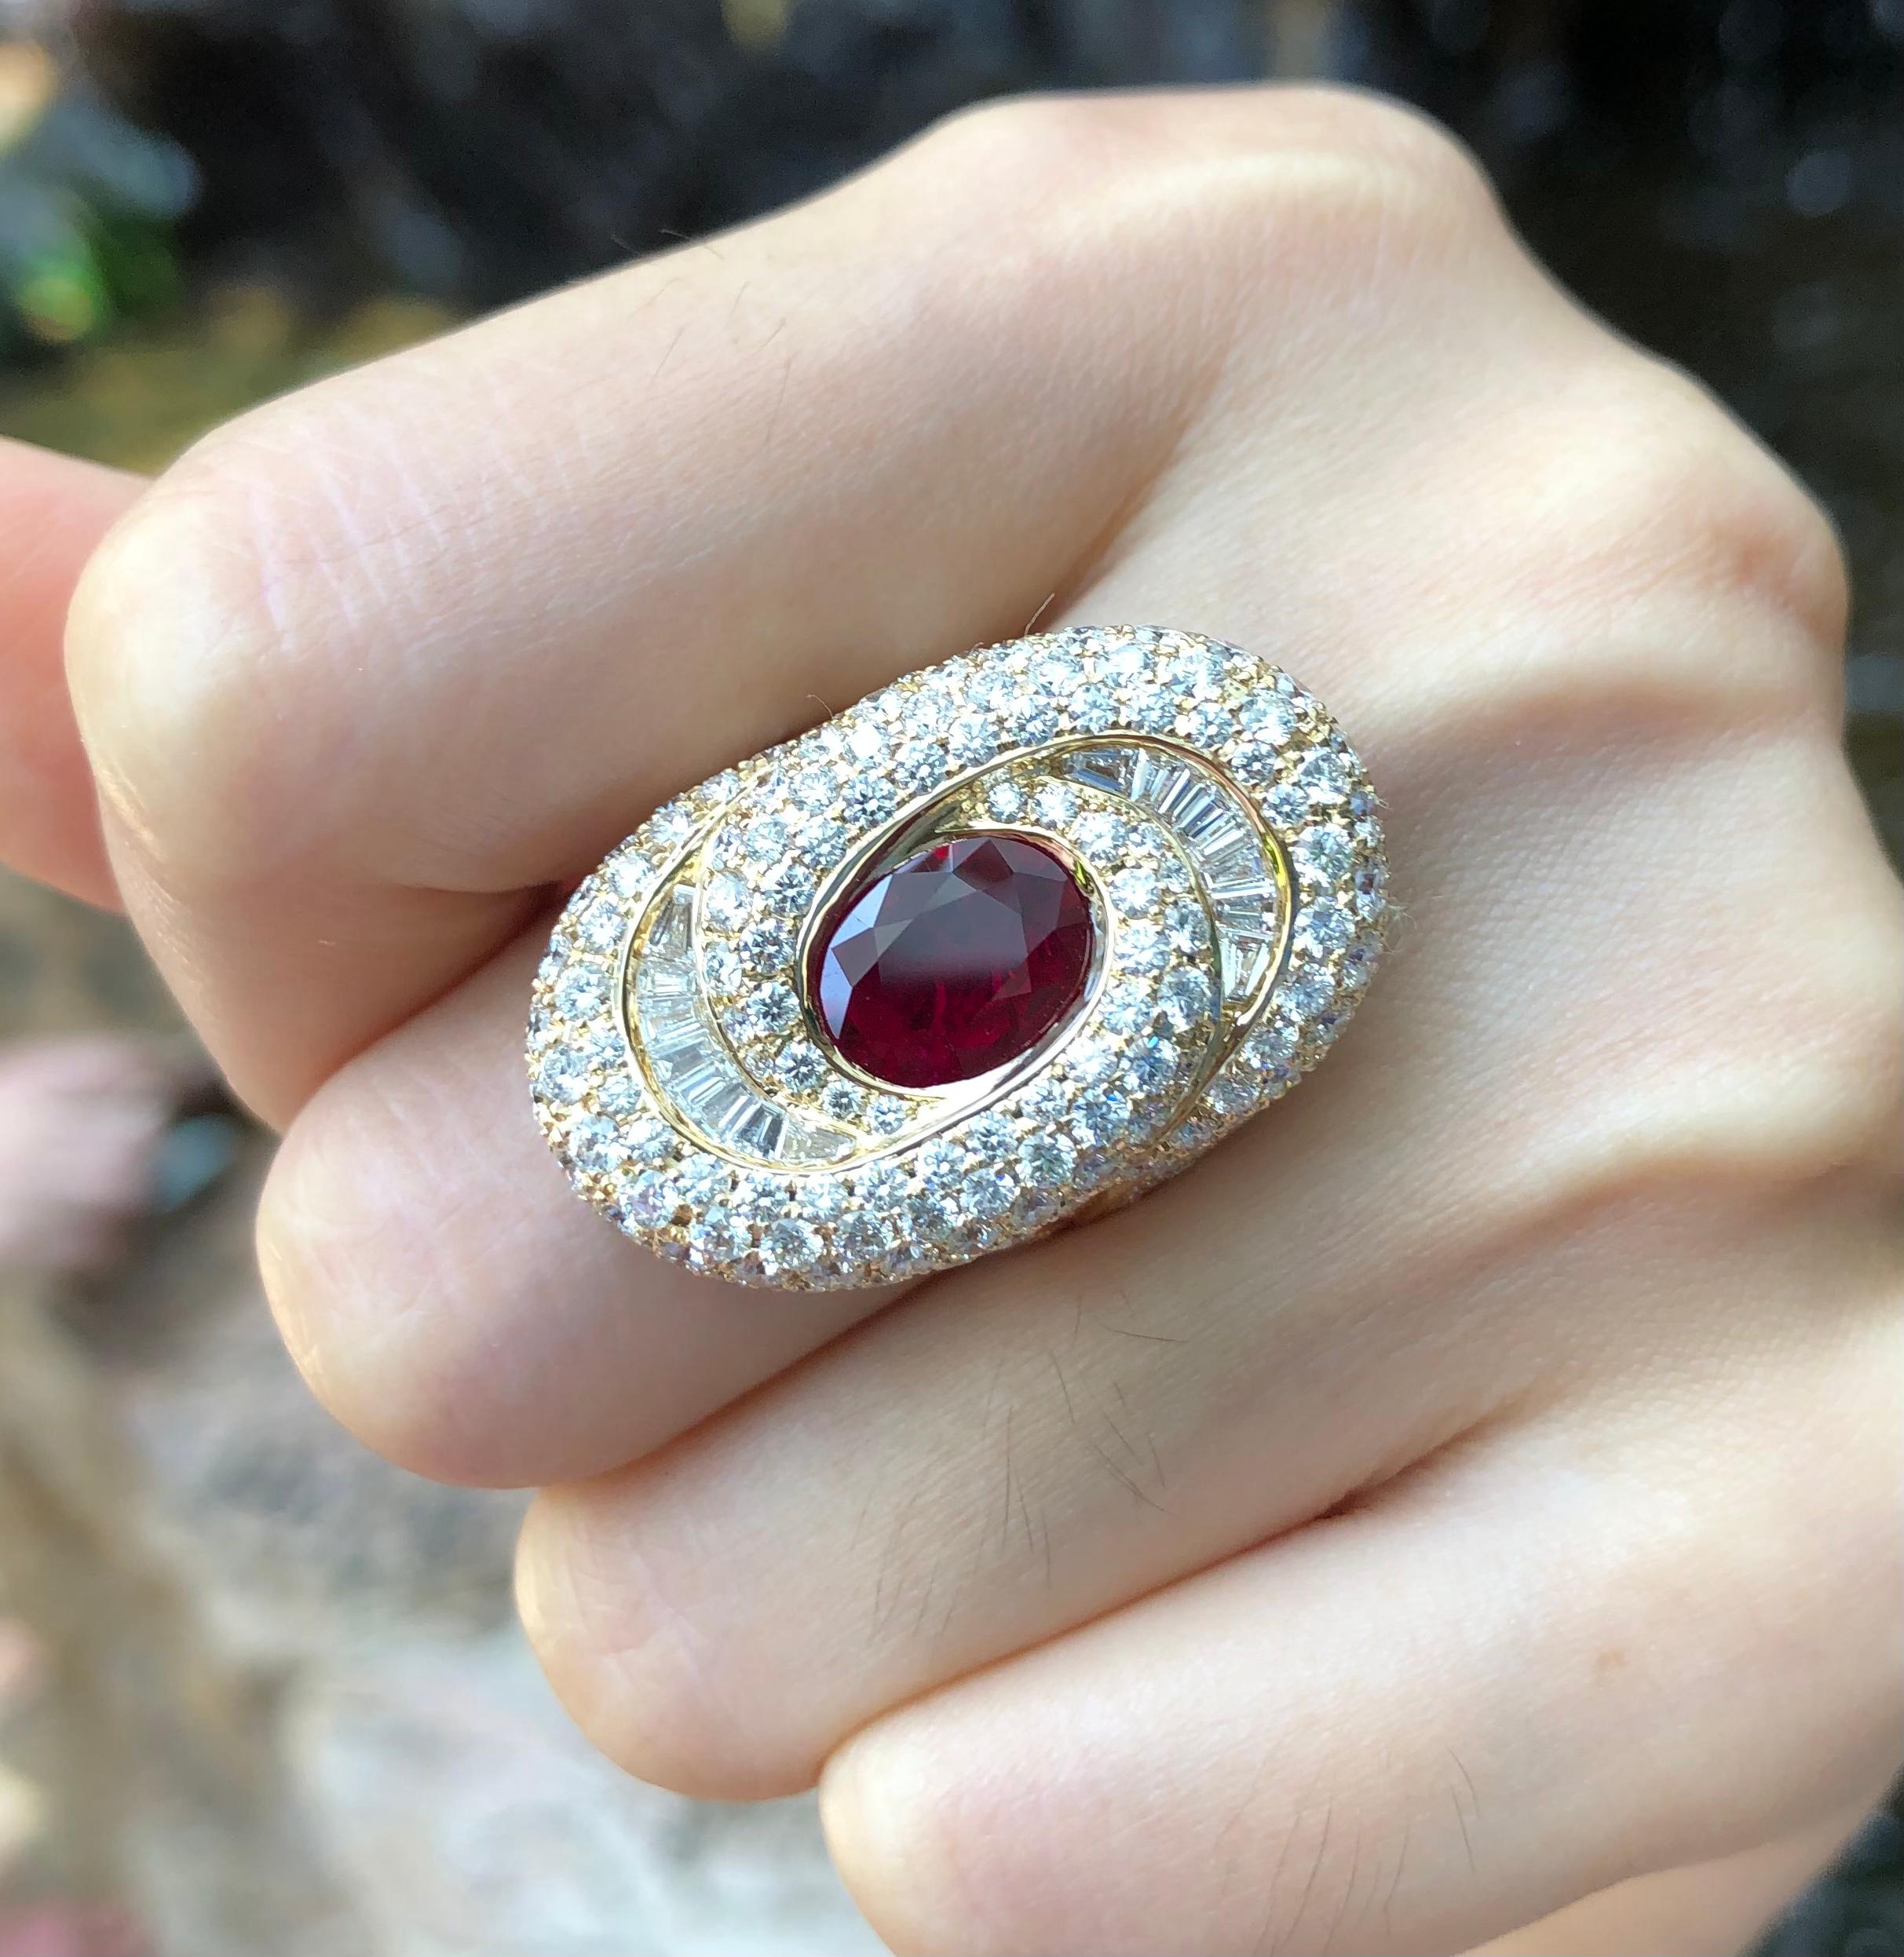 Ruby 1.85 carats with Diamond 4.14 carats Ring set in 18 Karat Gold Settings

Width:  1.8 cm 
Length:  3.0 cm
Ring Size: 53
Total Weight: 12.56 grams

